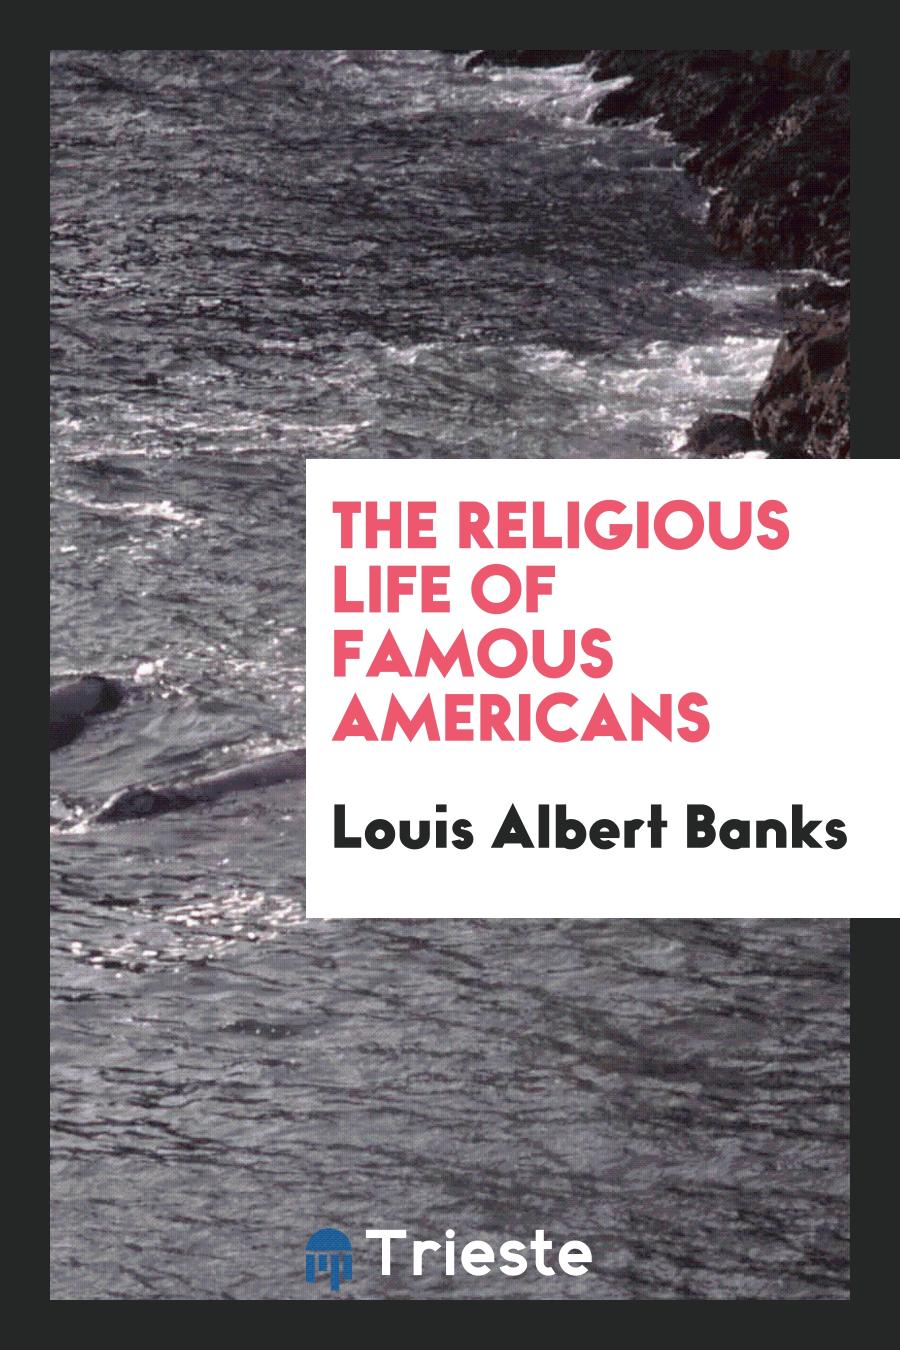 The religious life of famous Americans